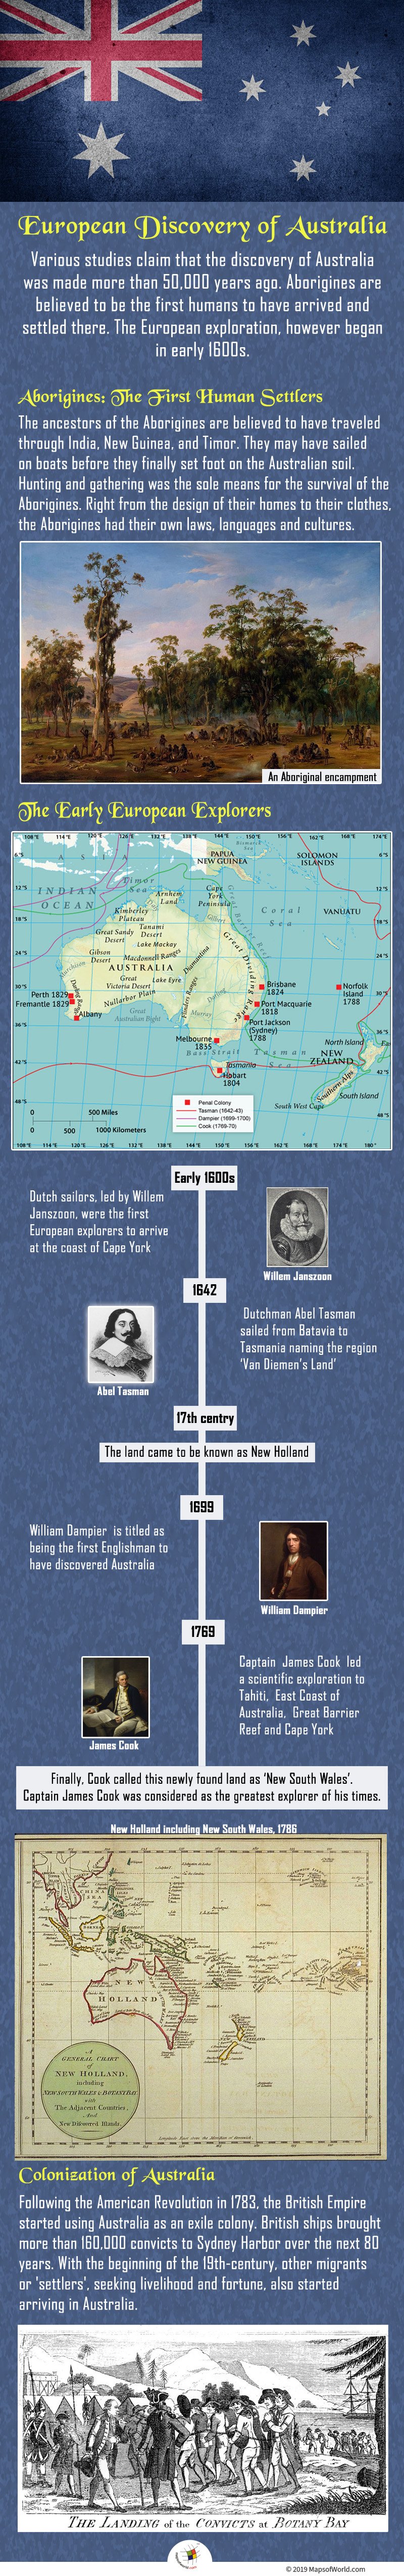 Infographic on Discovery of Australia